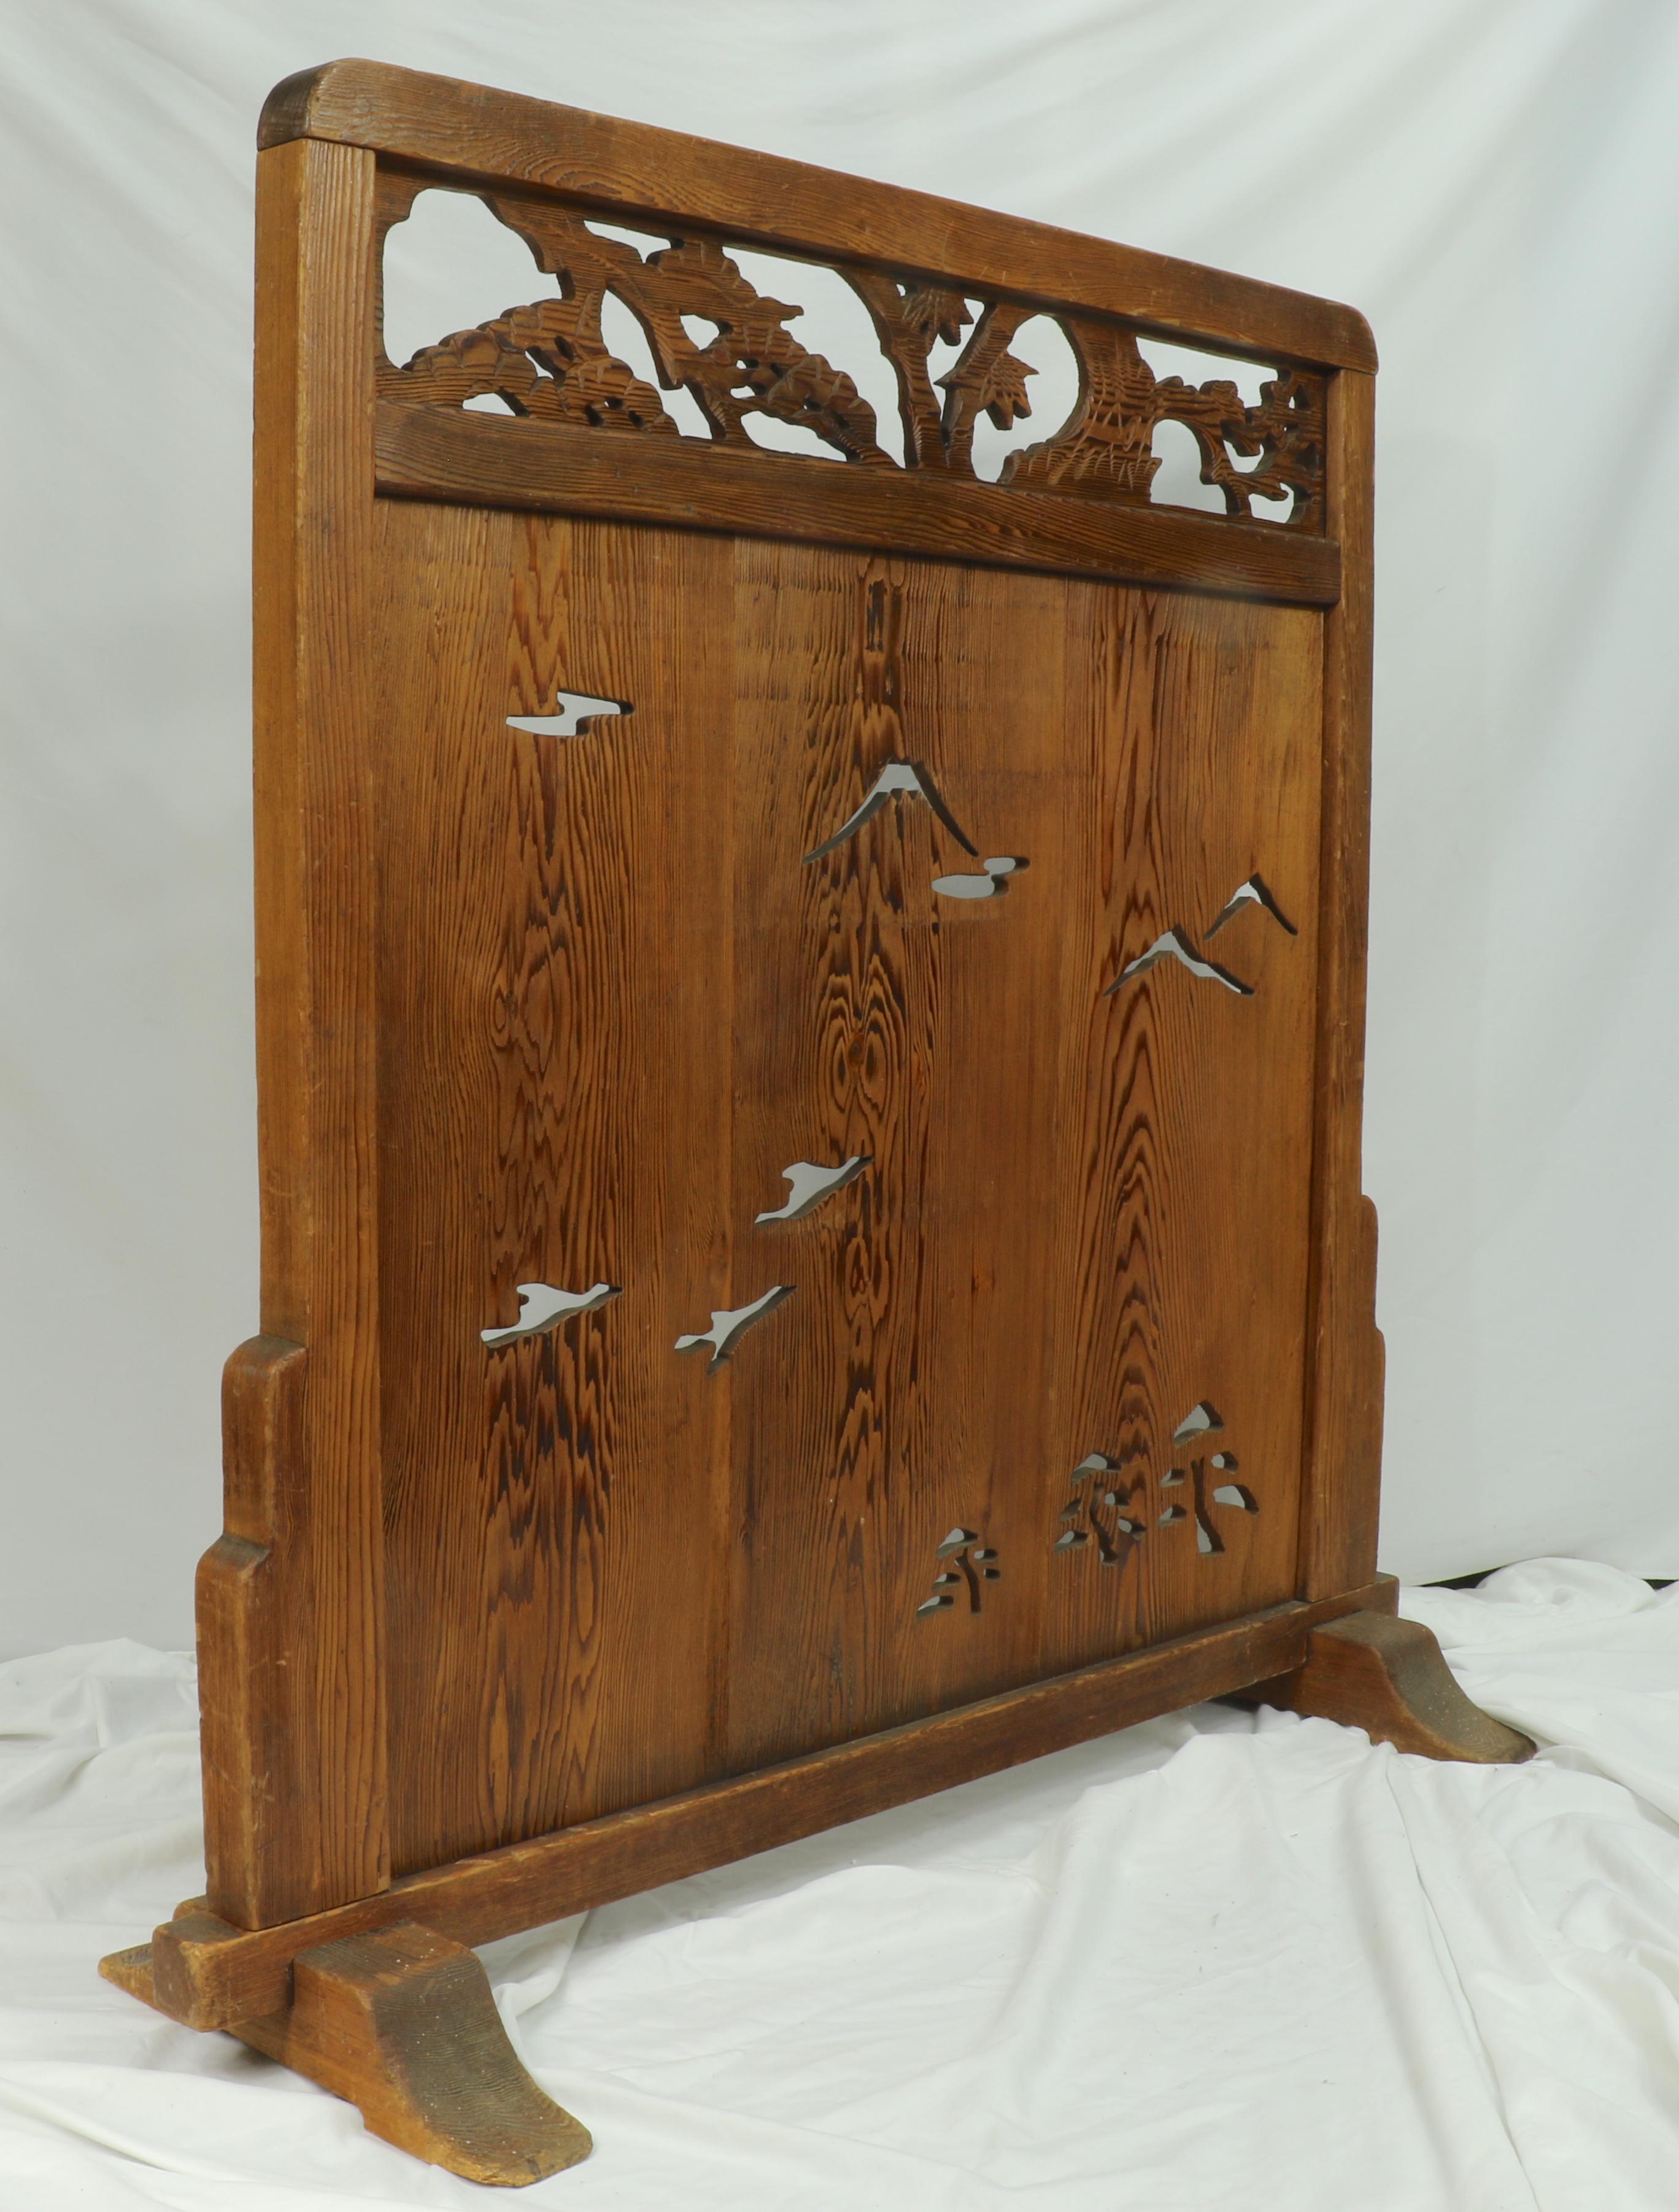 The delicate open hand-carving on this screen is distinctive. This is a late 19th, early 20th century Chinese divider screen made from hand-carved redwood and motifs that include mountains, trees and birds in flight. 
This rectangular divider rests